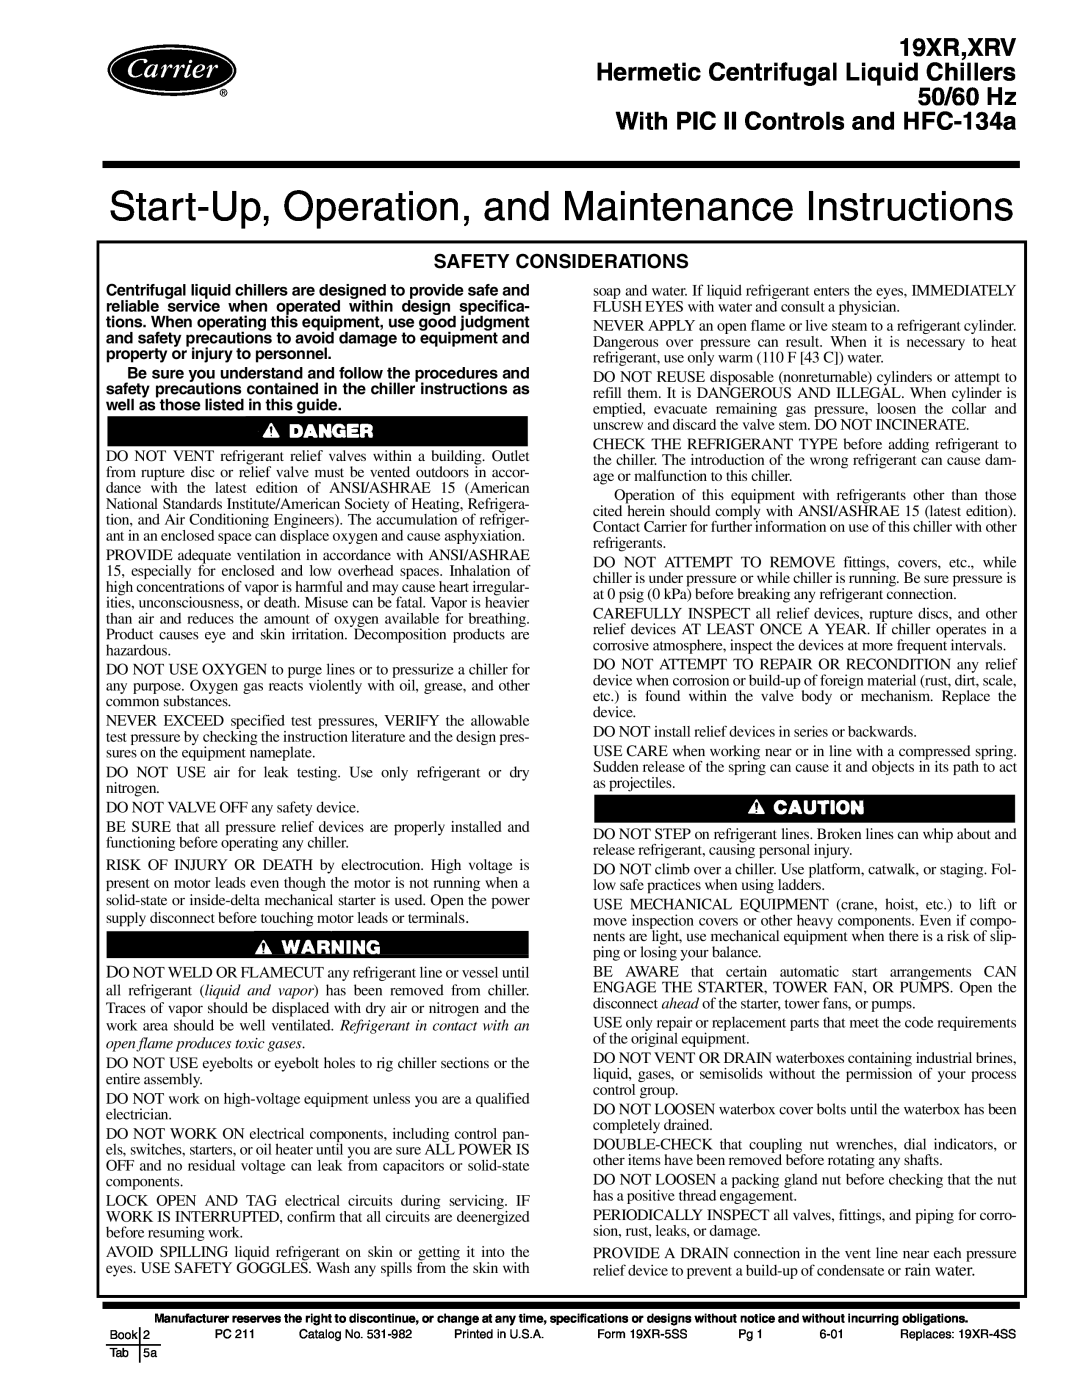 Carrier XRV, 19XR specifications Safety Considerations, Start-Up, Operation, and Maintenance Instructions 